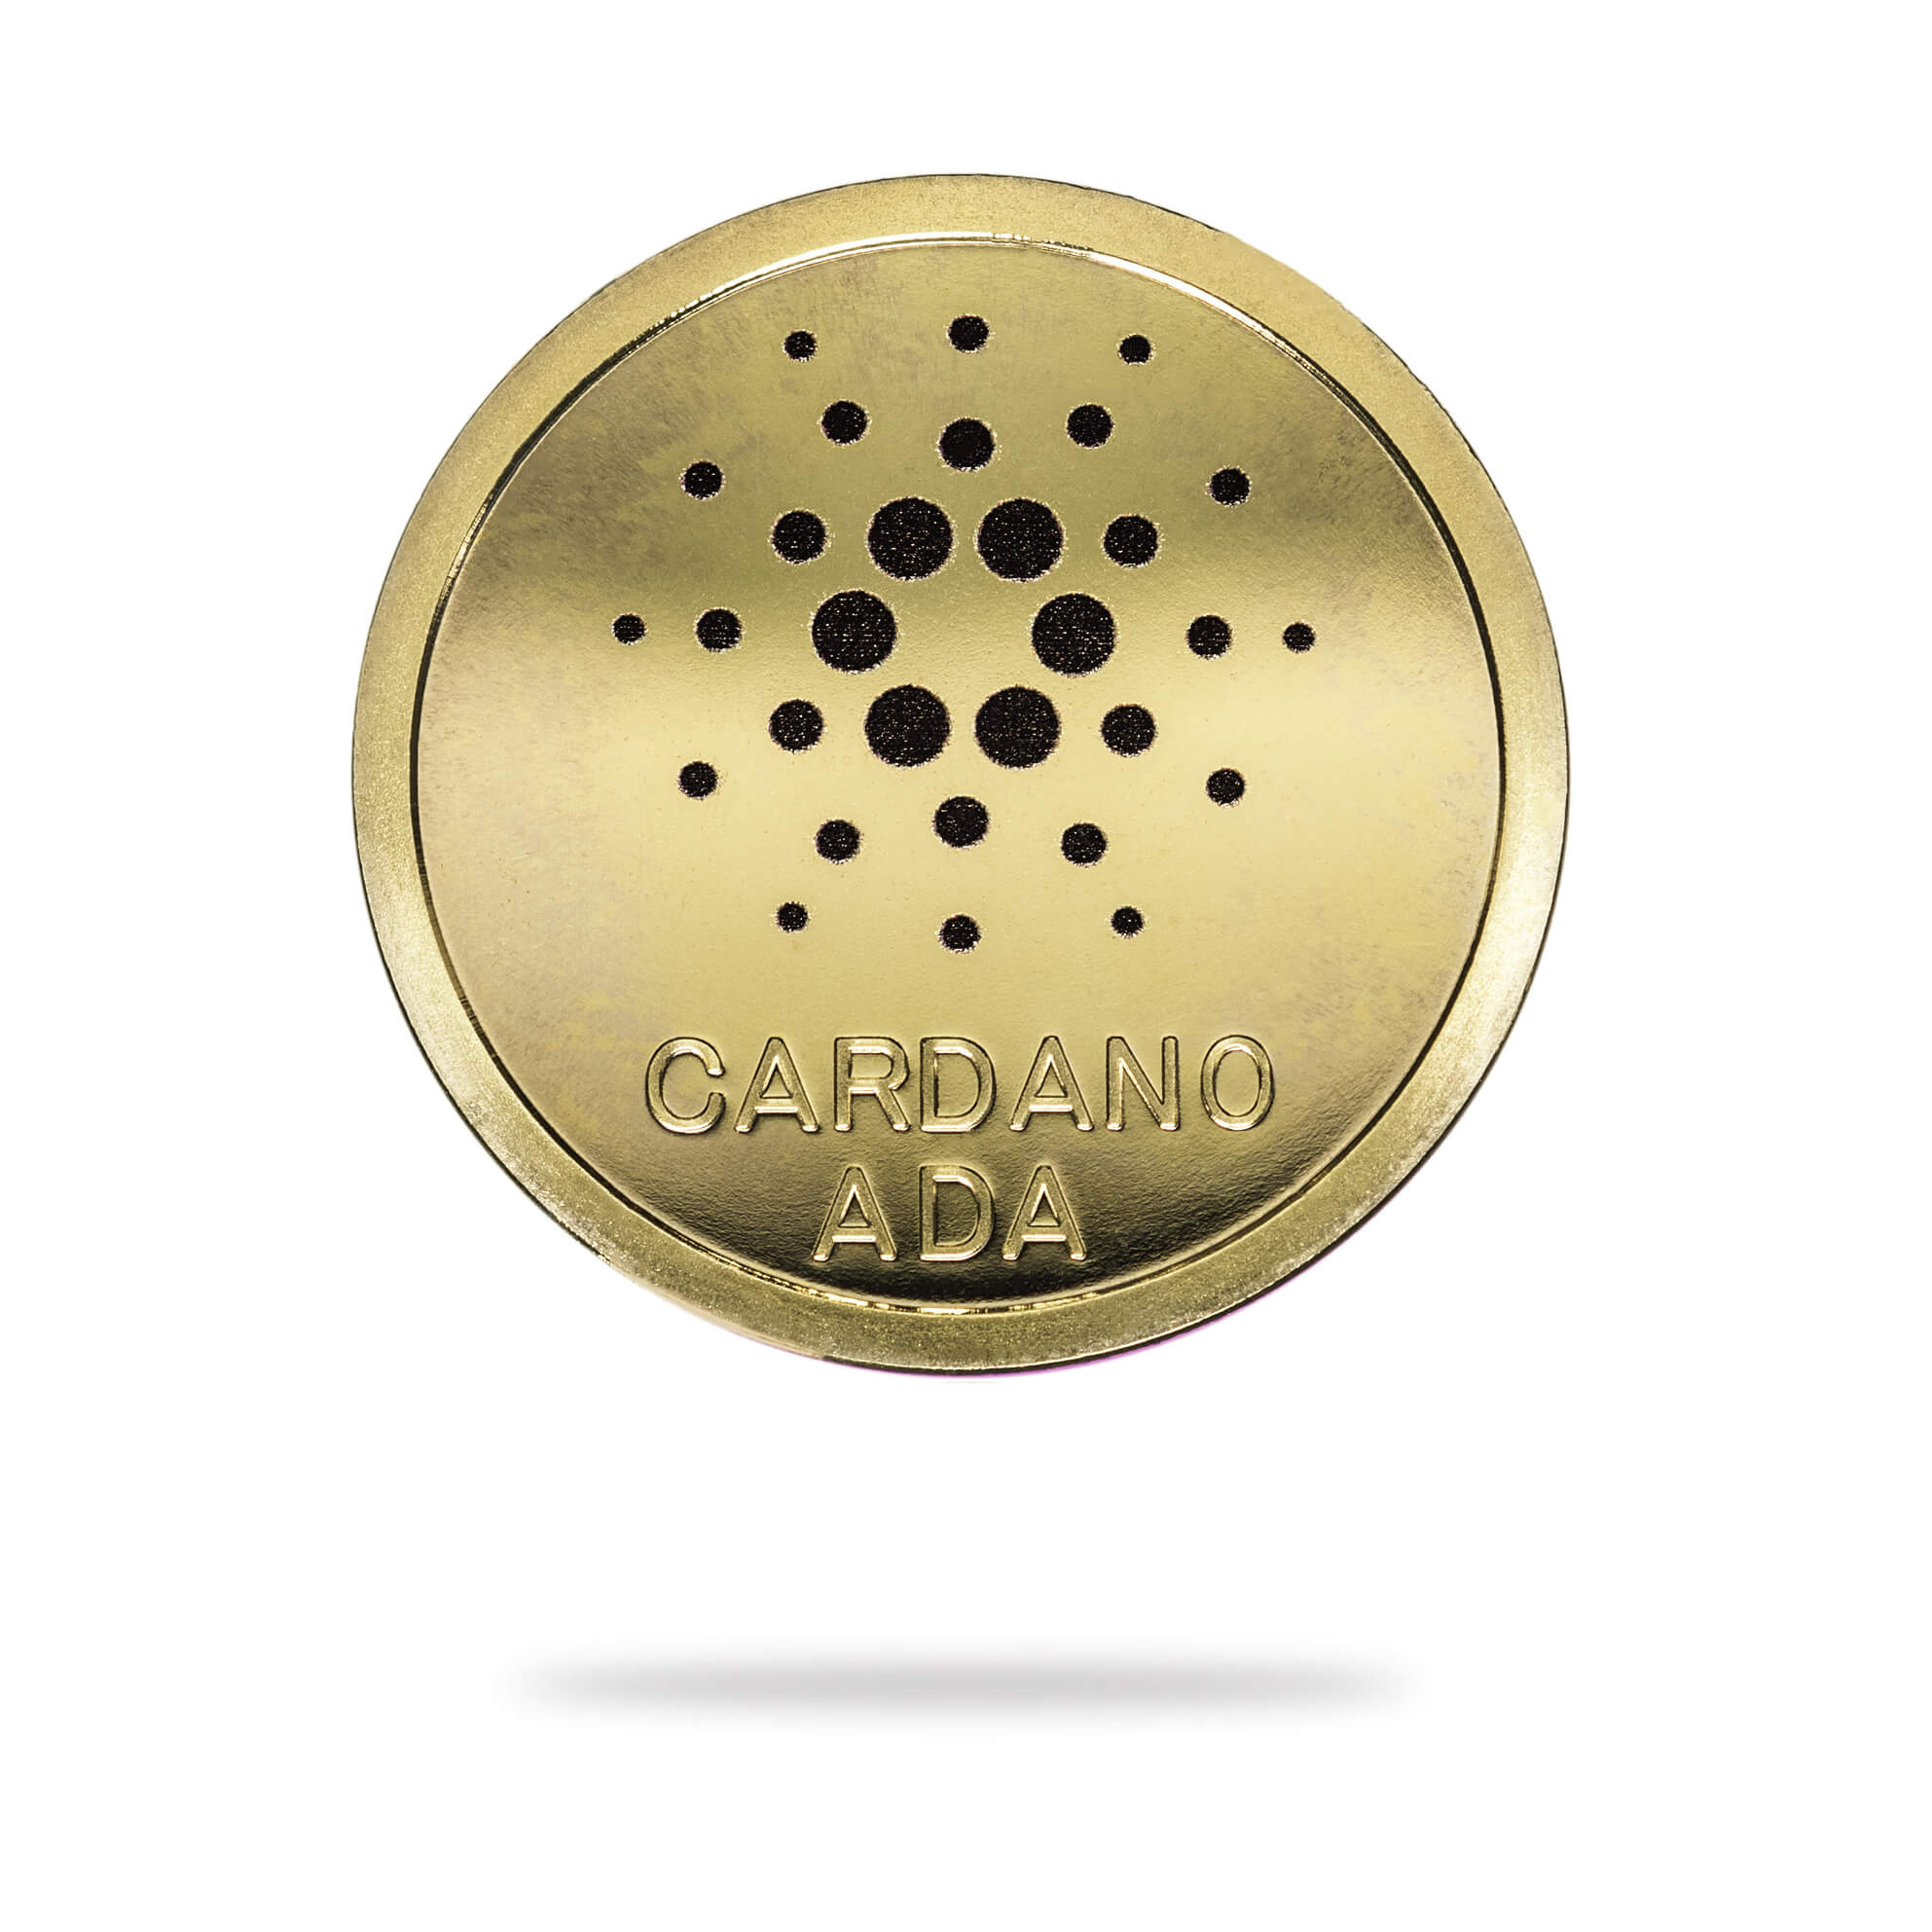 Cryptochips | Cardano (2021 Edition) Physical Crypto Coin. Collectable cryptocurrency merch you can hodl